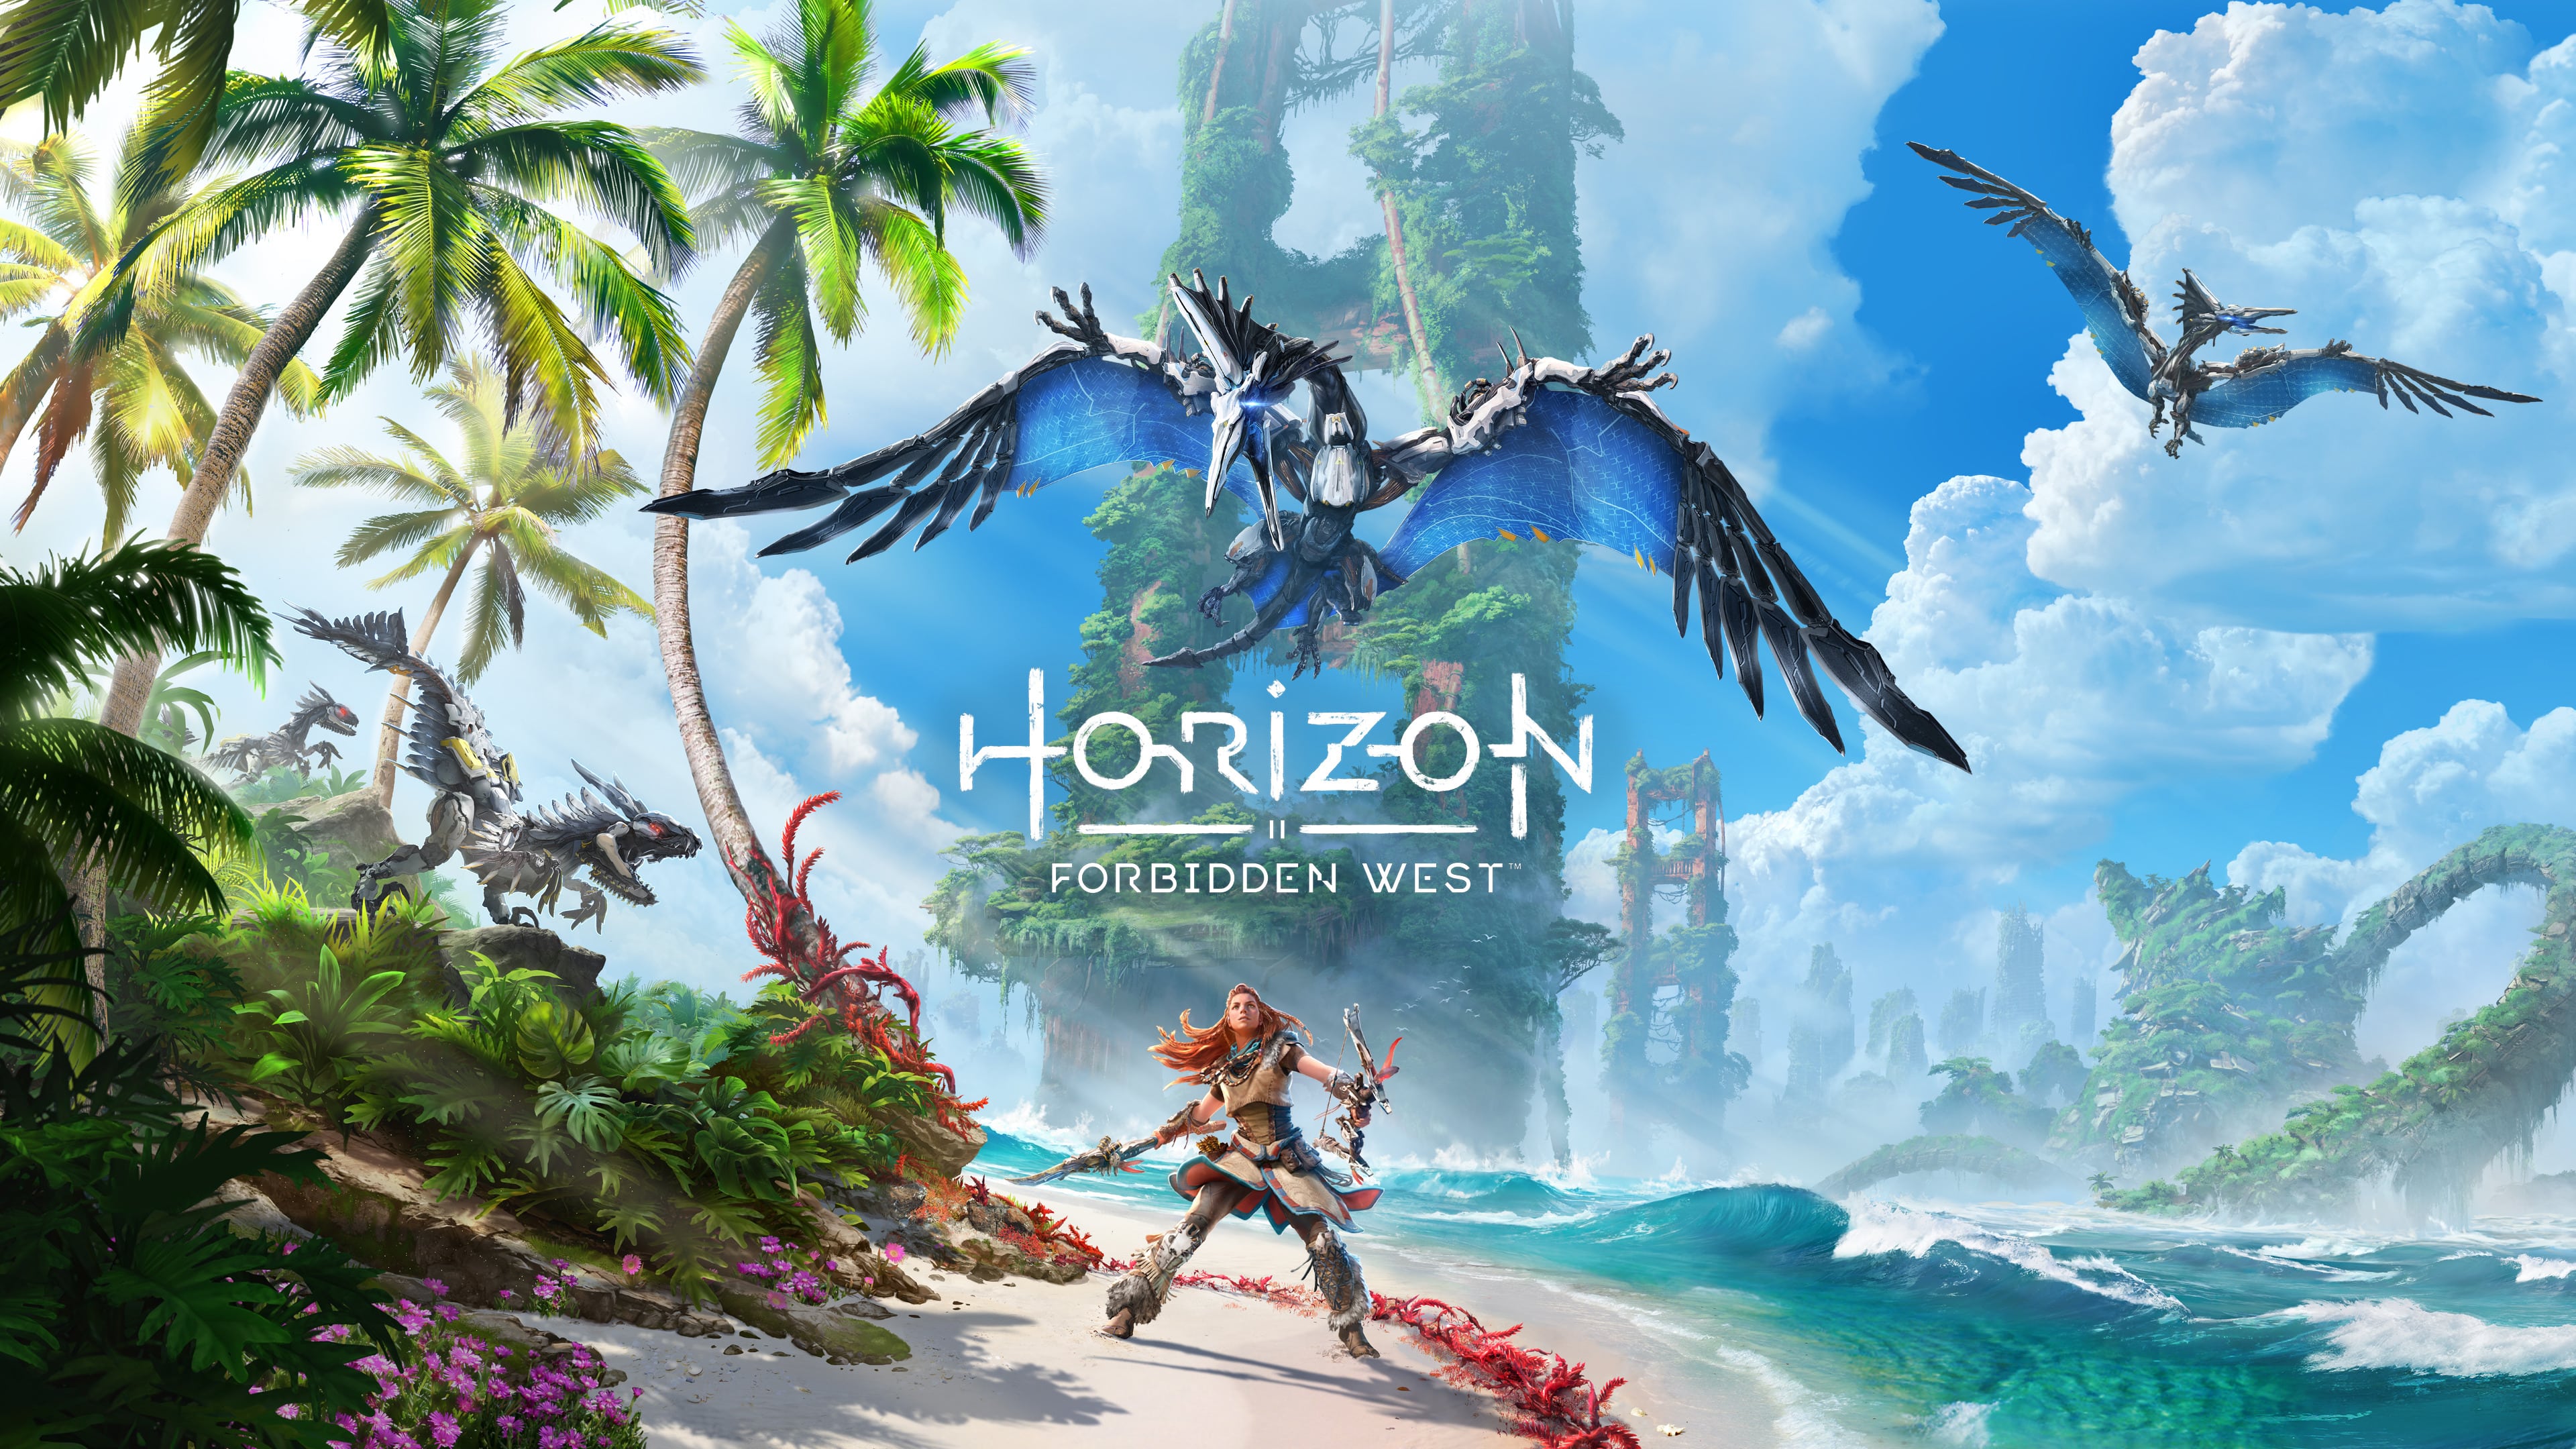 Horizon Forbidden West: Complete Edition on its way to PC and PS5